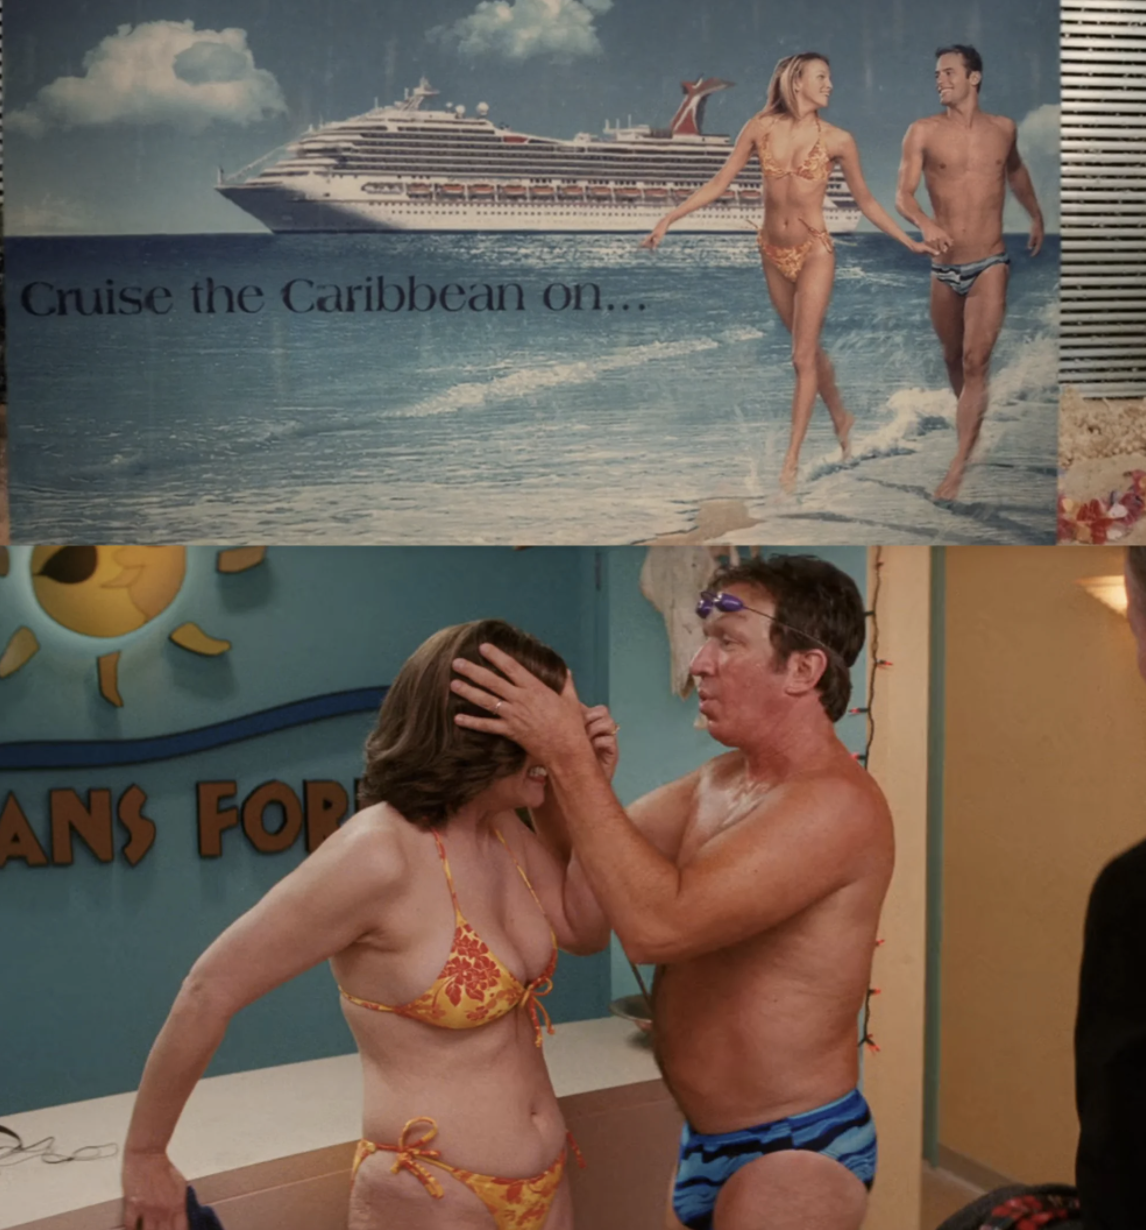 Image of Jamie Lee Curtis and Tim Allen wearing the same swimsuits as a couple on a cruise poster